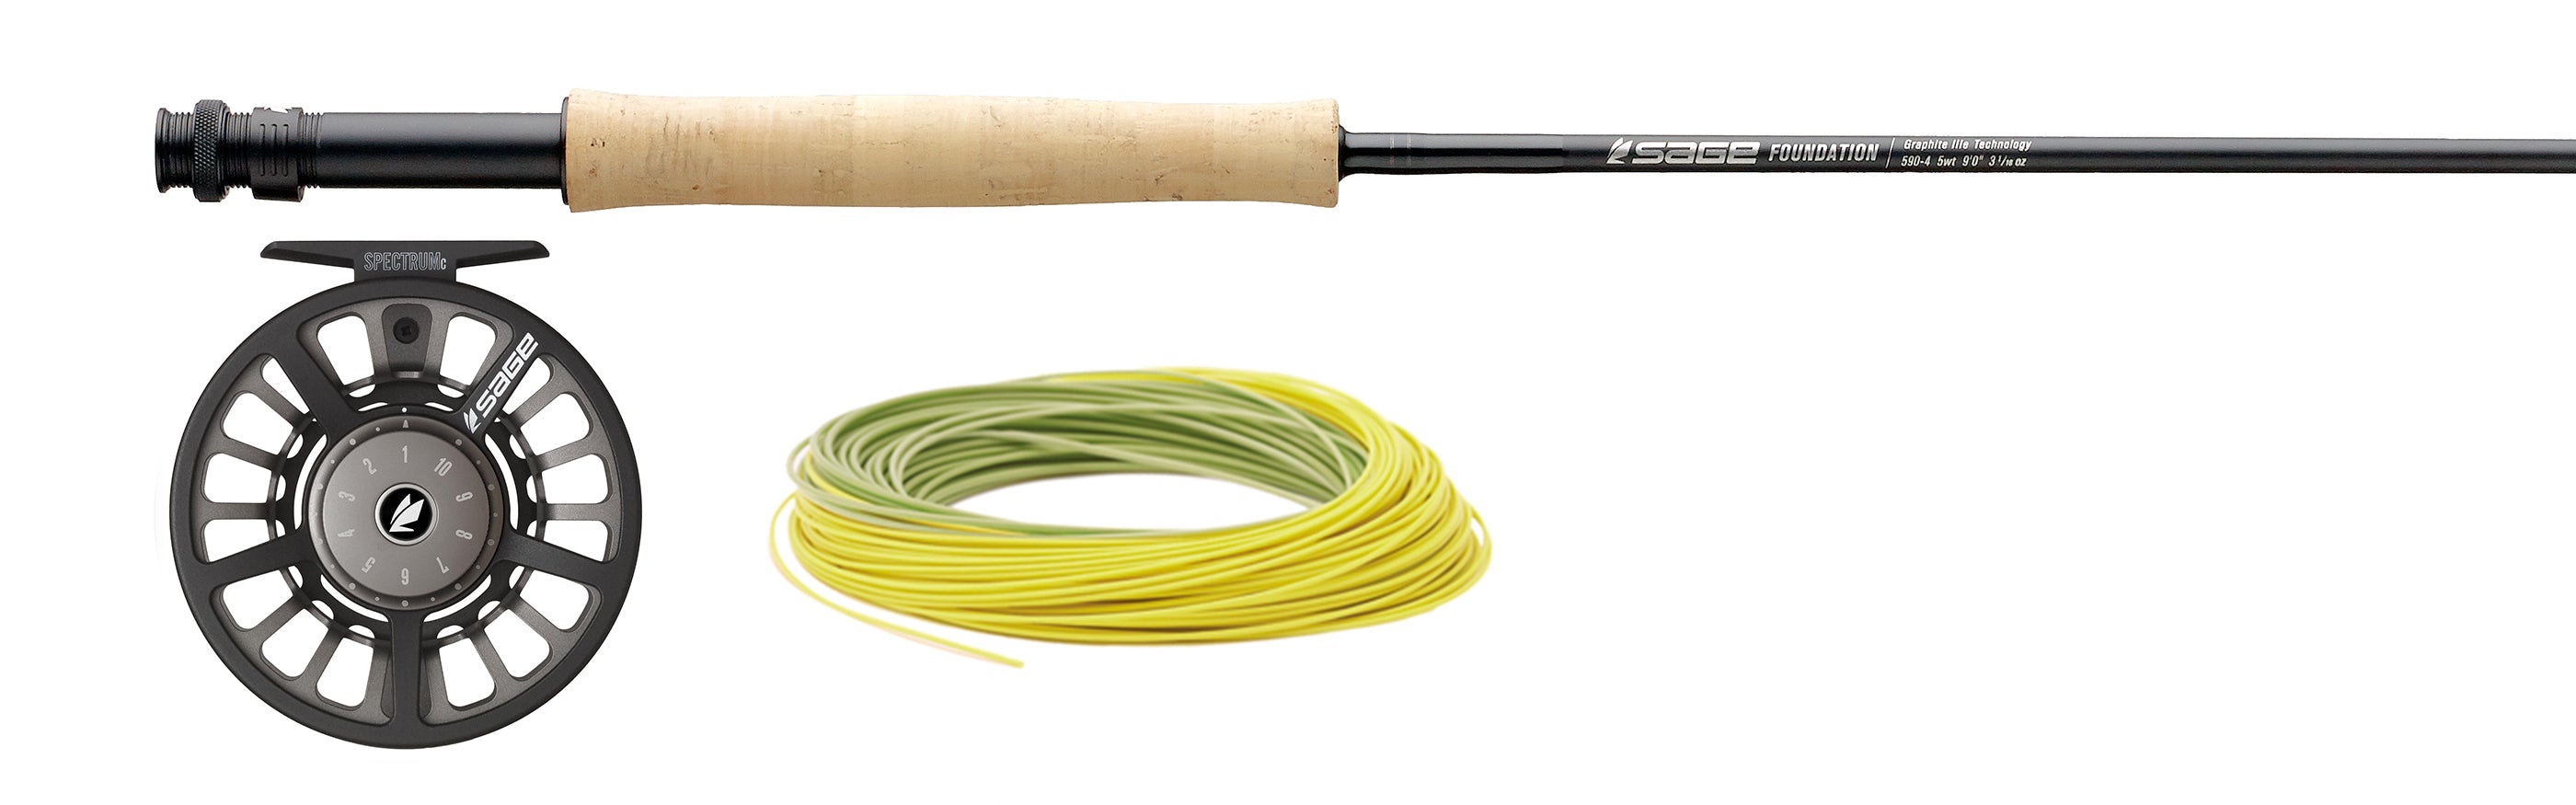 Sage Foundation Outfit - Fly Rod and Reel Outfit Combo with Fly Line!